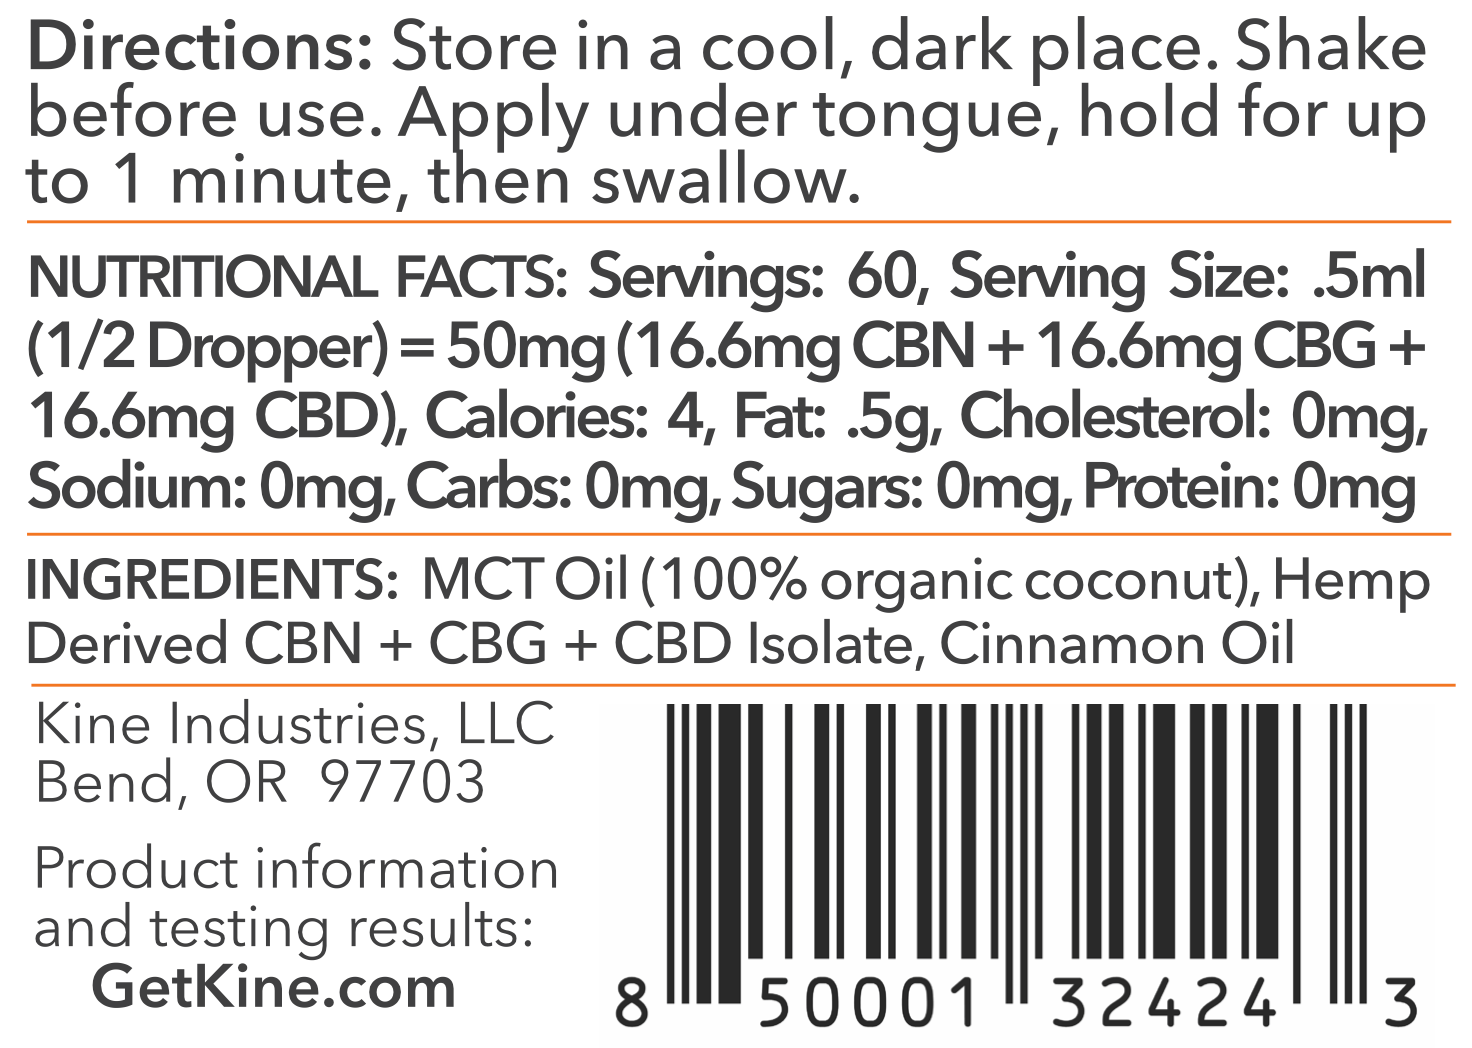 Kine Red Hot Cinnamon Flavored Organic CBN/CBG/CBD 1:1:1 ratio 3000mg tincture drops ingredients list and nutritional facts